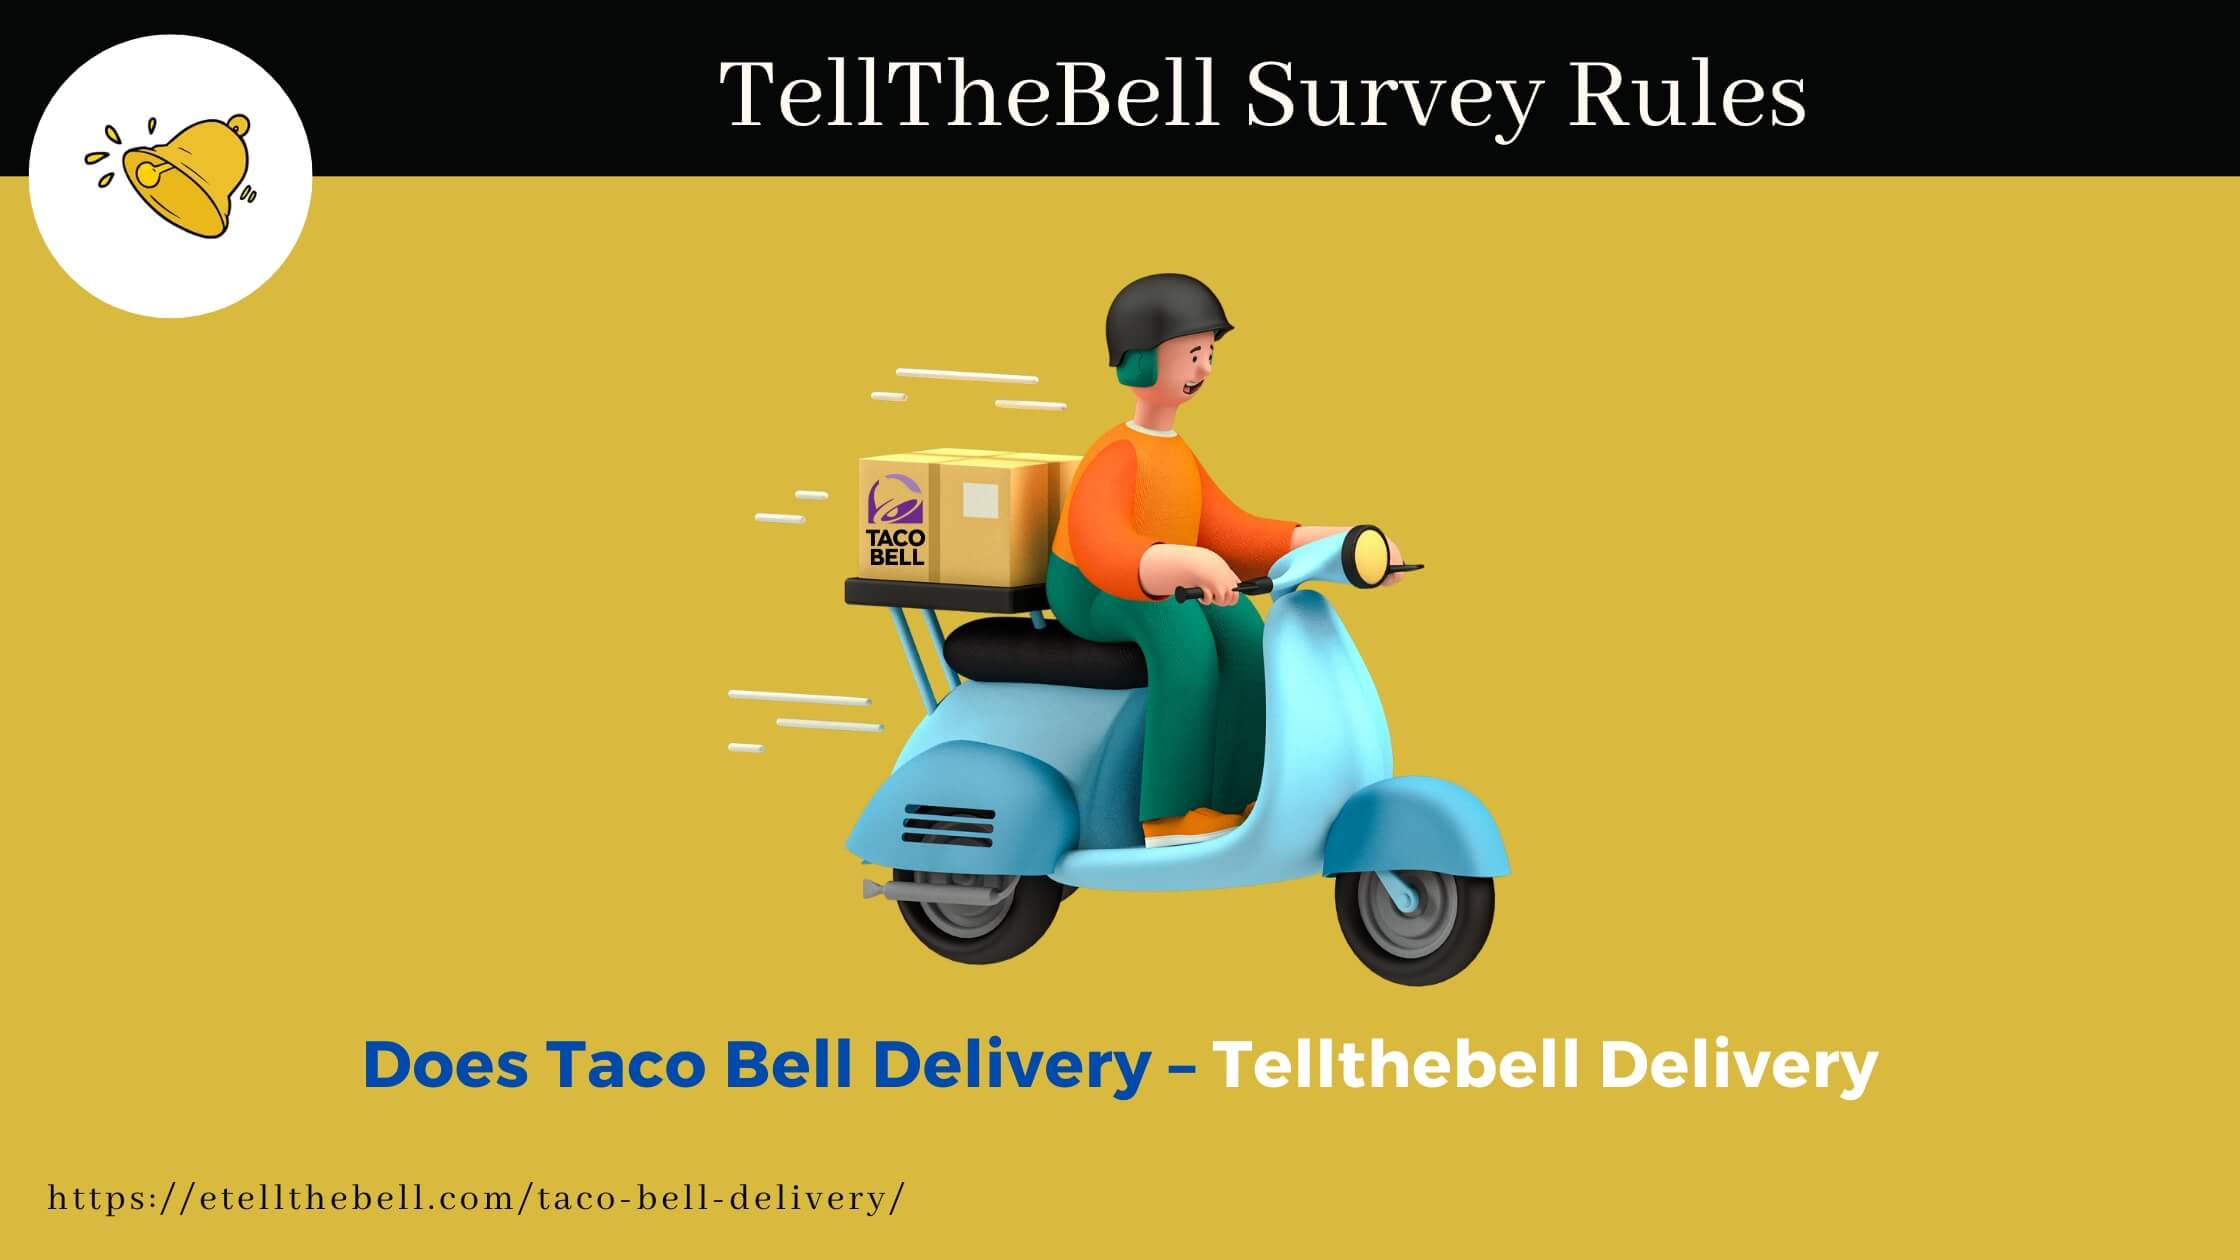 Does Taco Bell Delivery – Tellthebell Delivery